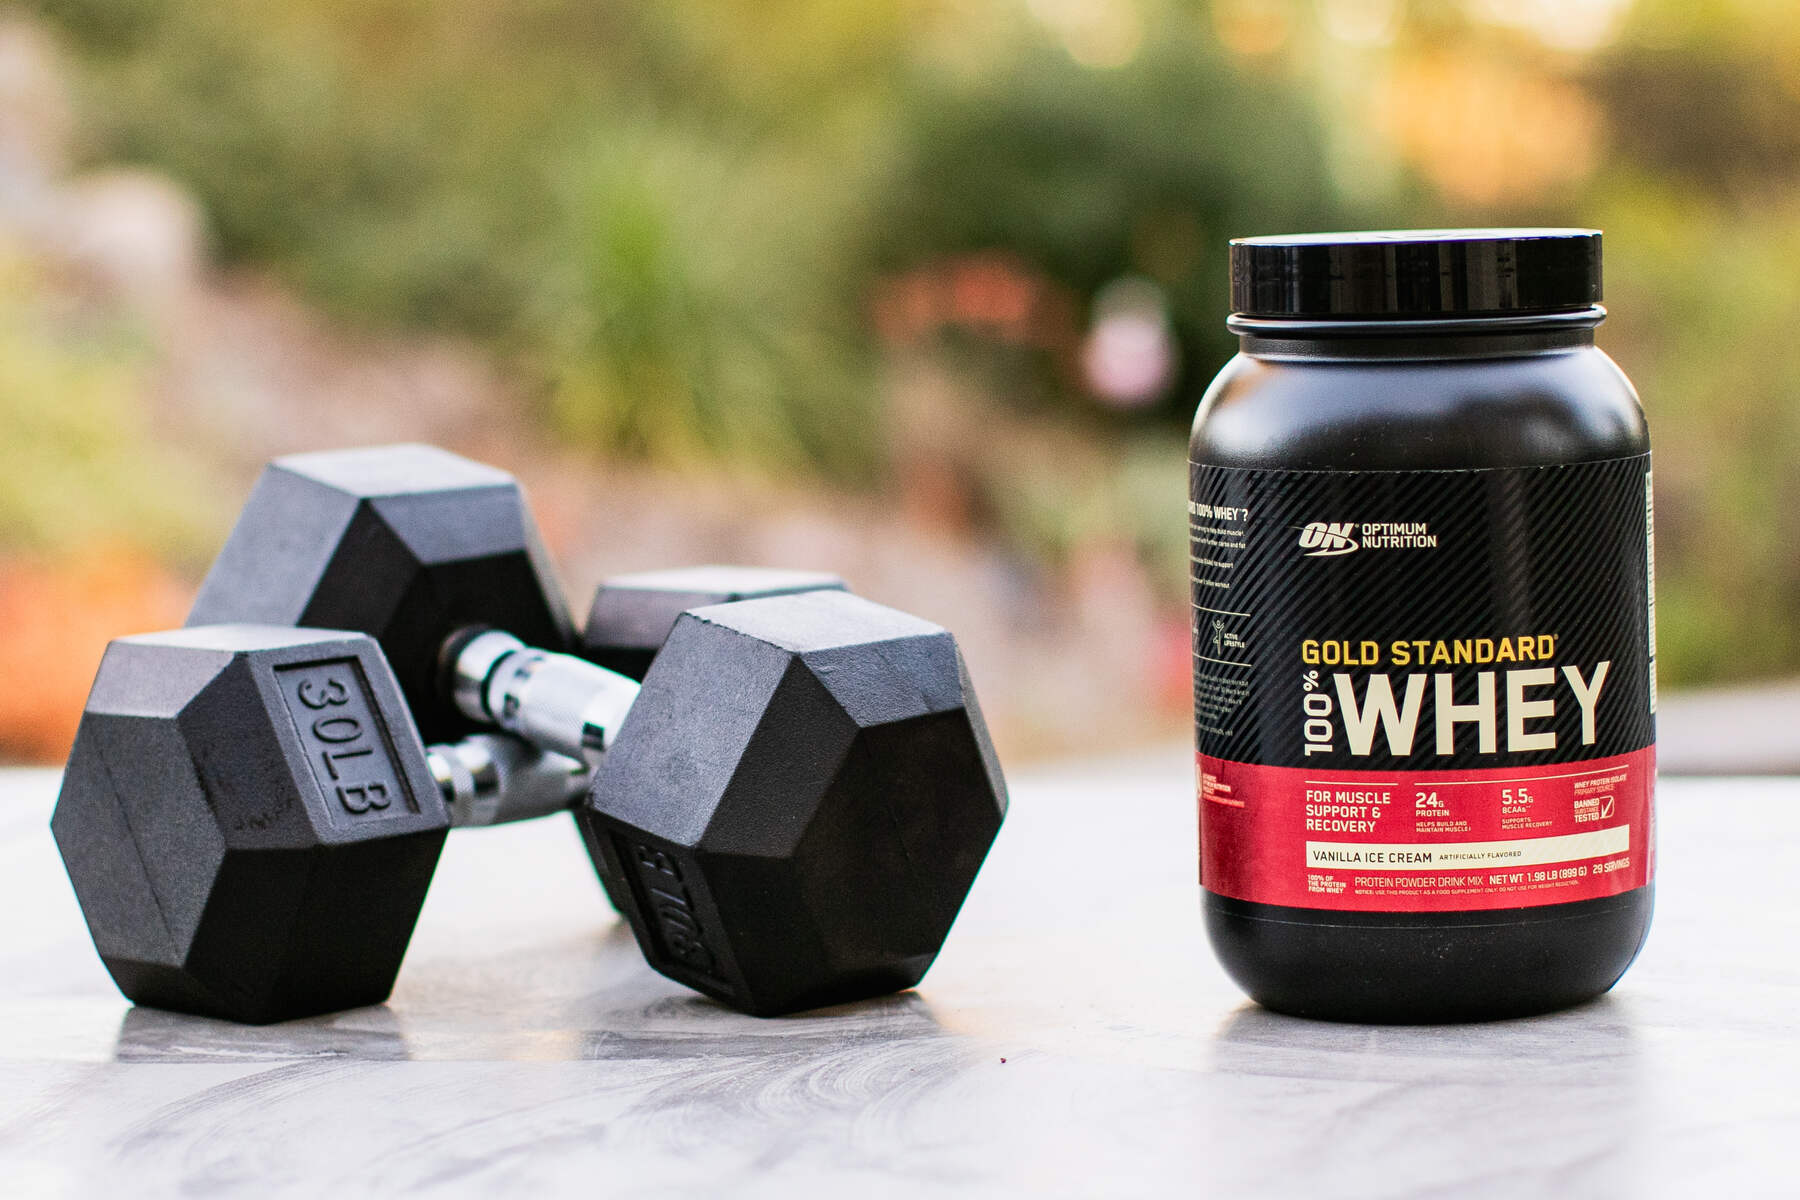 Whey protein container and dumbbells on an outdoor surface